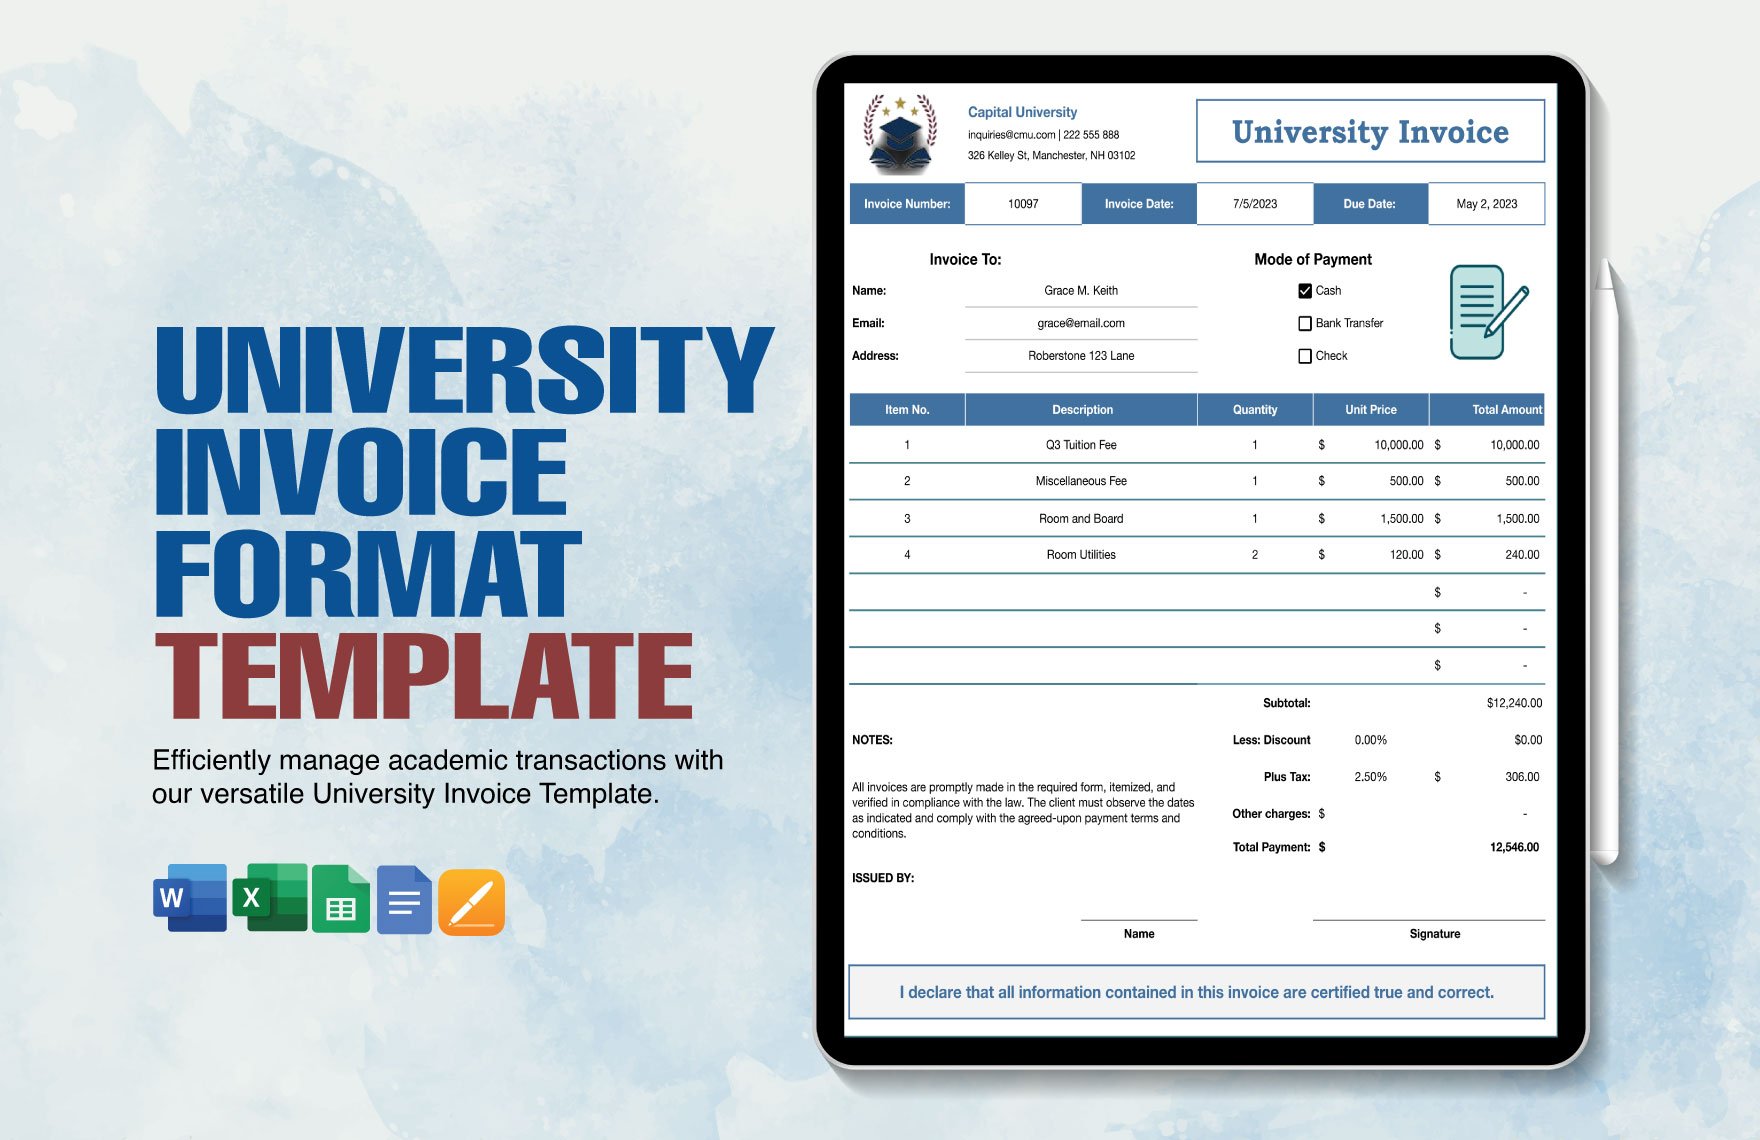 University Invoice Format Template in Word, Google Docs, Excel, Google Sheets, Apple Pages